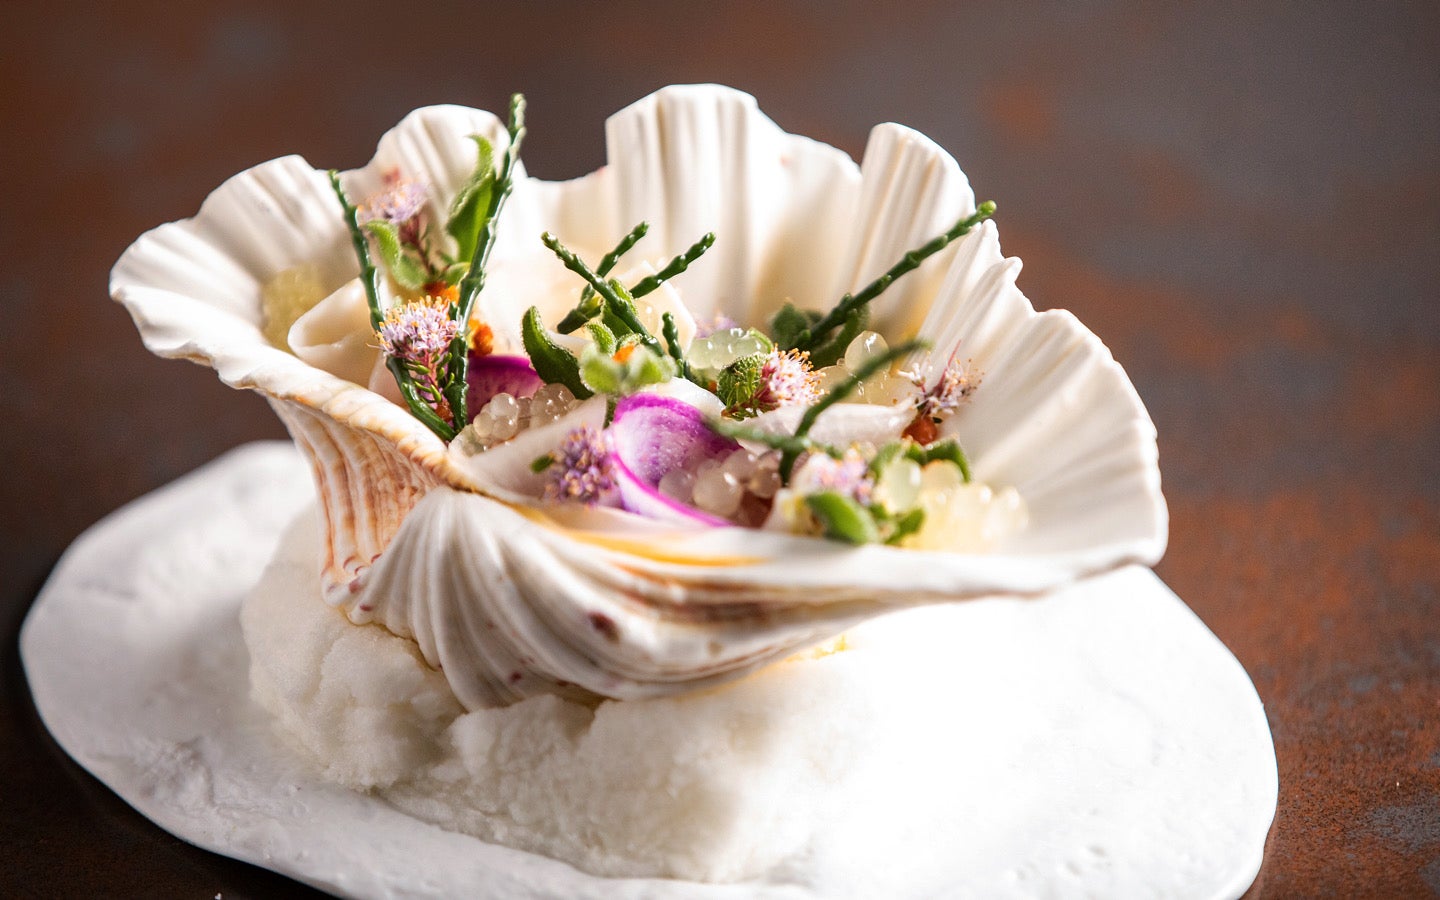 Very nice dish in a shell